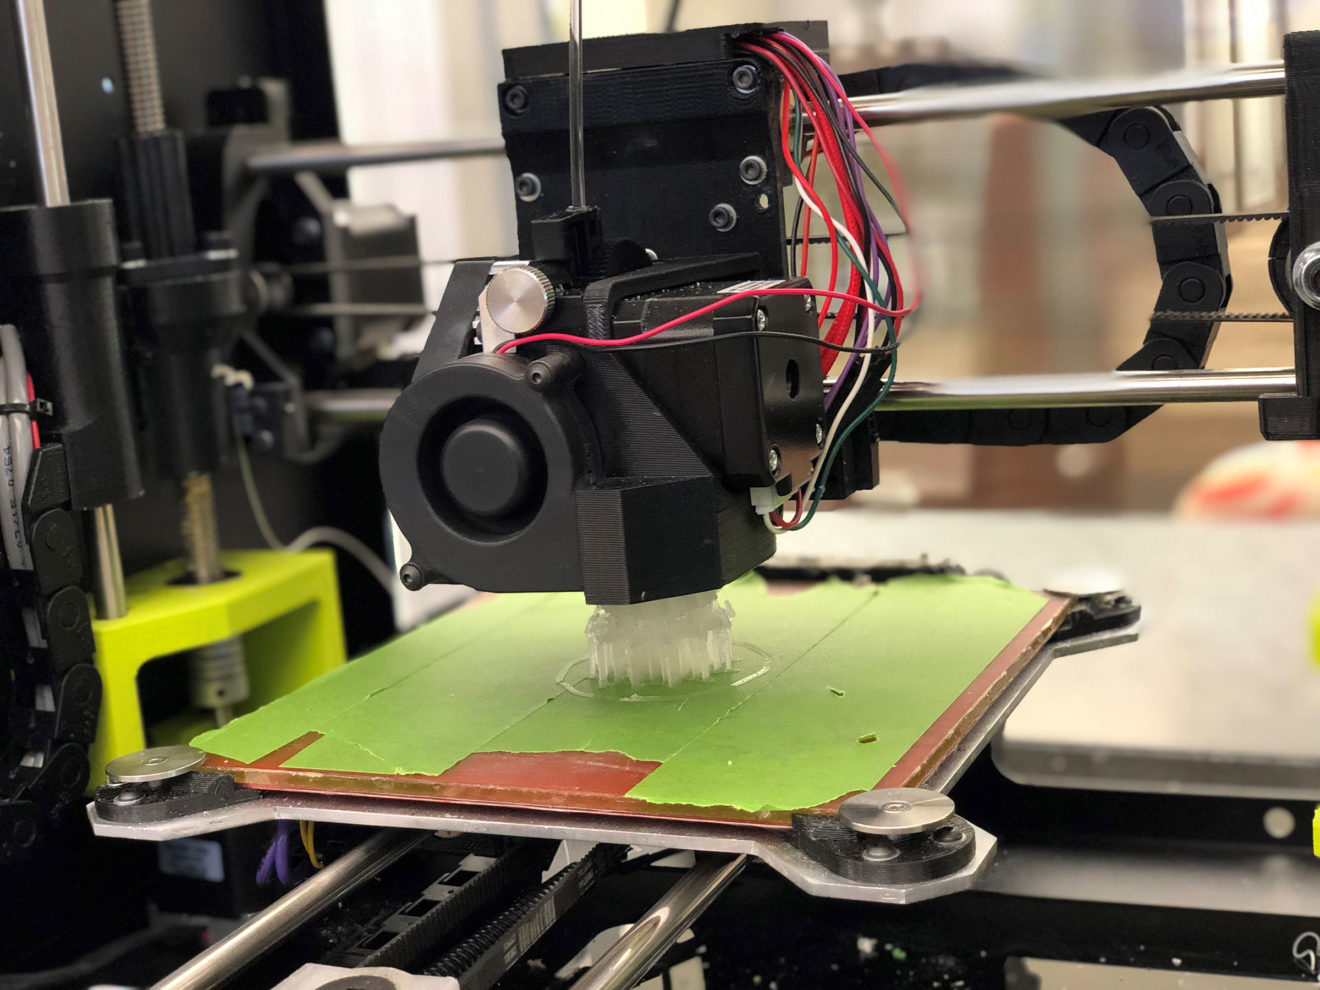 A 3D printer is seen creating a prototype out of moldable material.